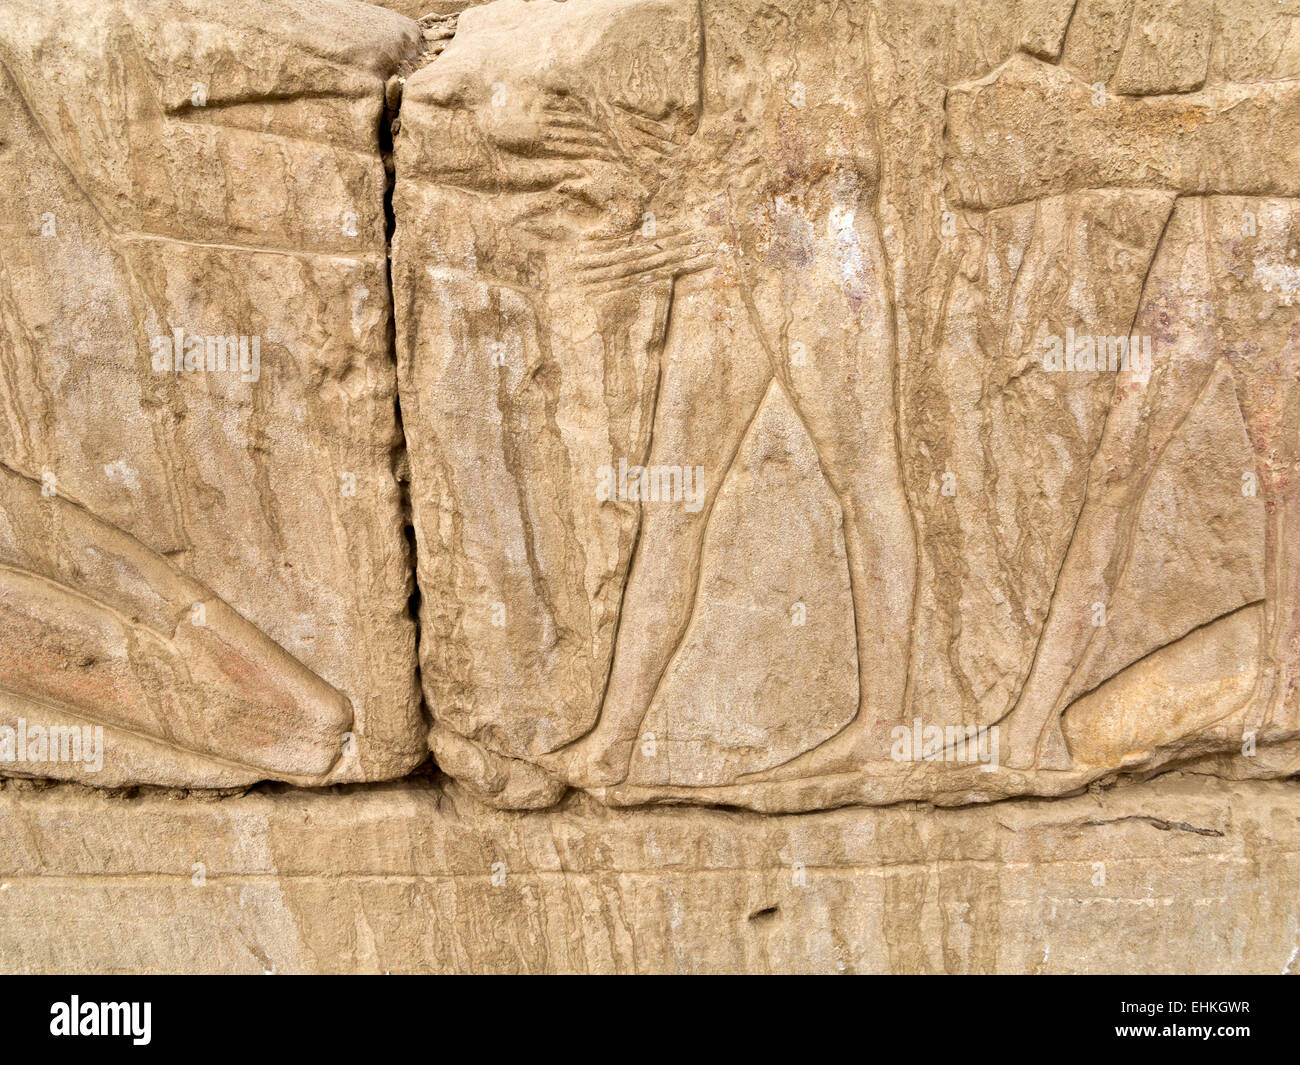 Relief From The Circumcision Scenes In The Temple Of Mut The Great At Karnak Luxor Egypt Stock